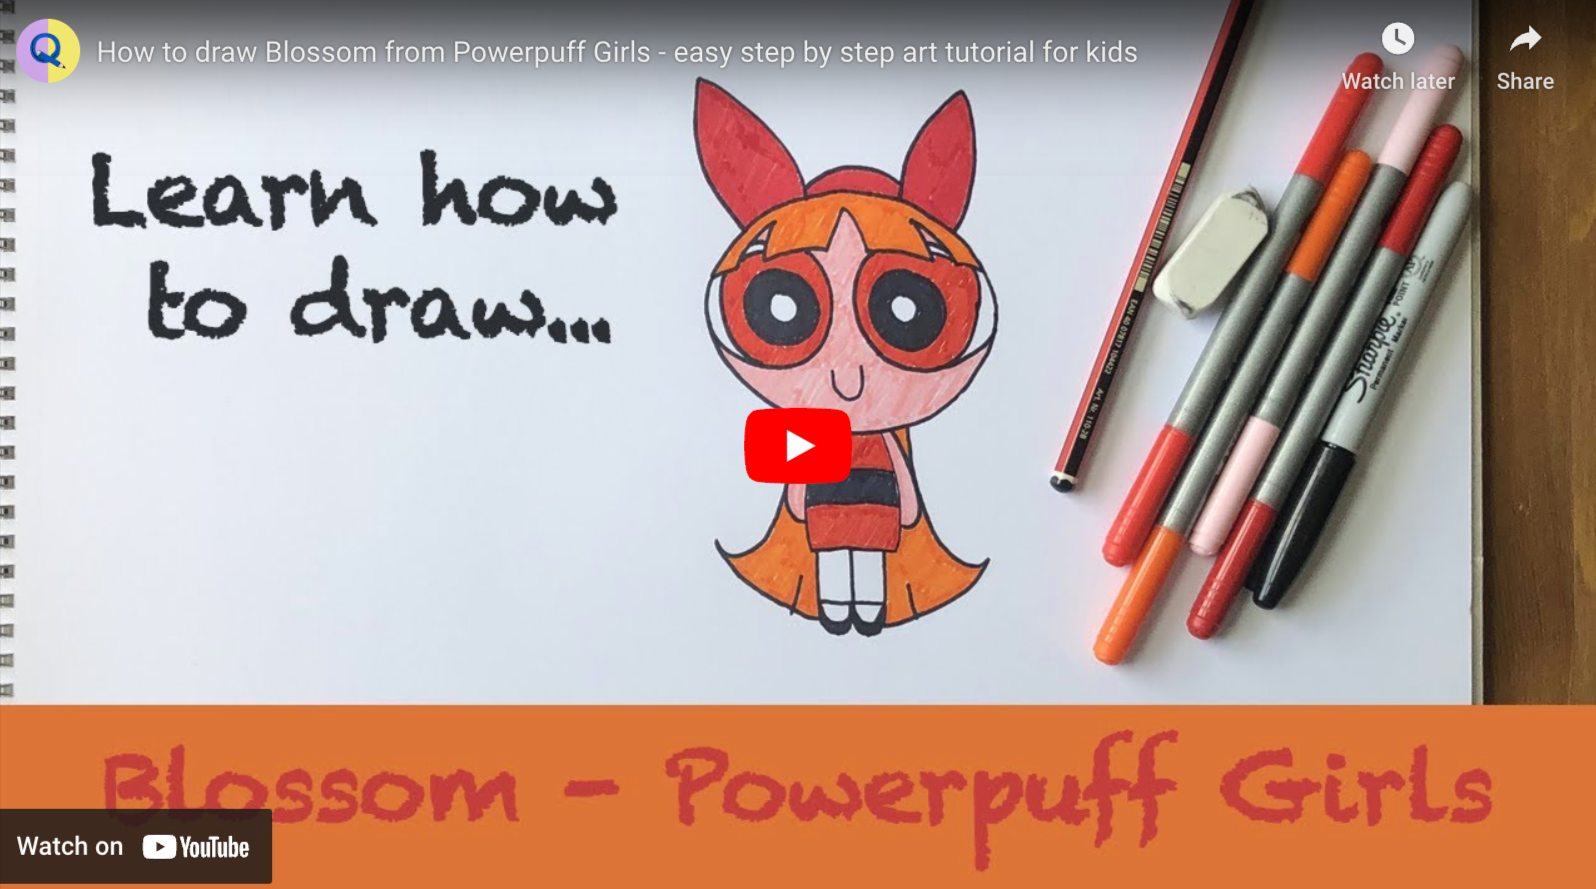 How To Draw A Girl For Kids, Step by Step, Drawing Guide, by Dawn - DragoArt